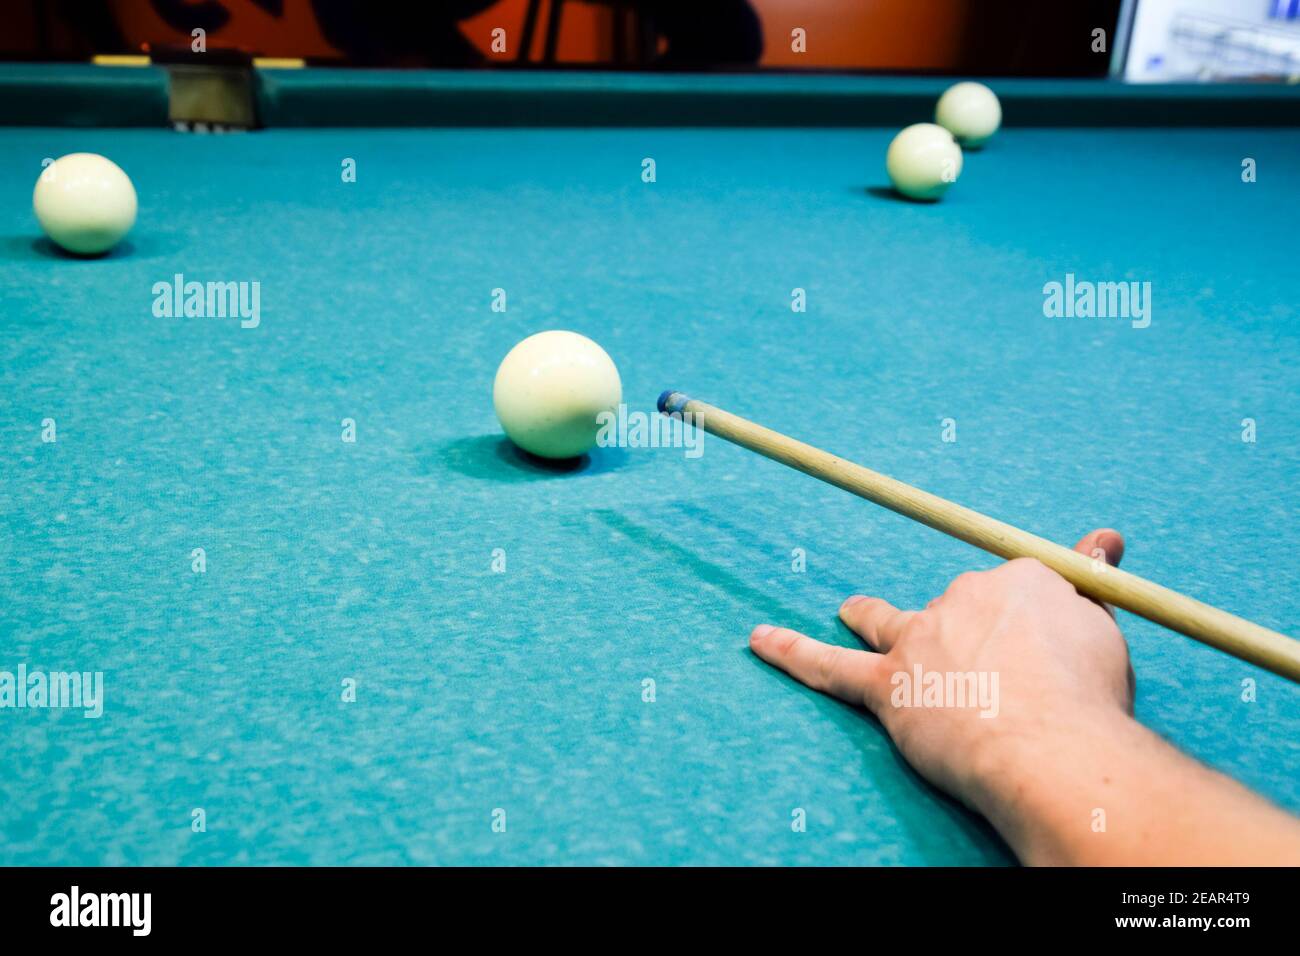 Billiards, billiard table. Targeting the cue in the ball for imp Stock Photo